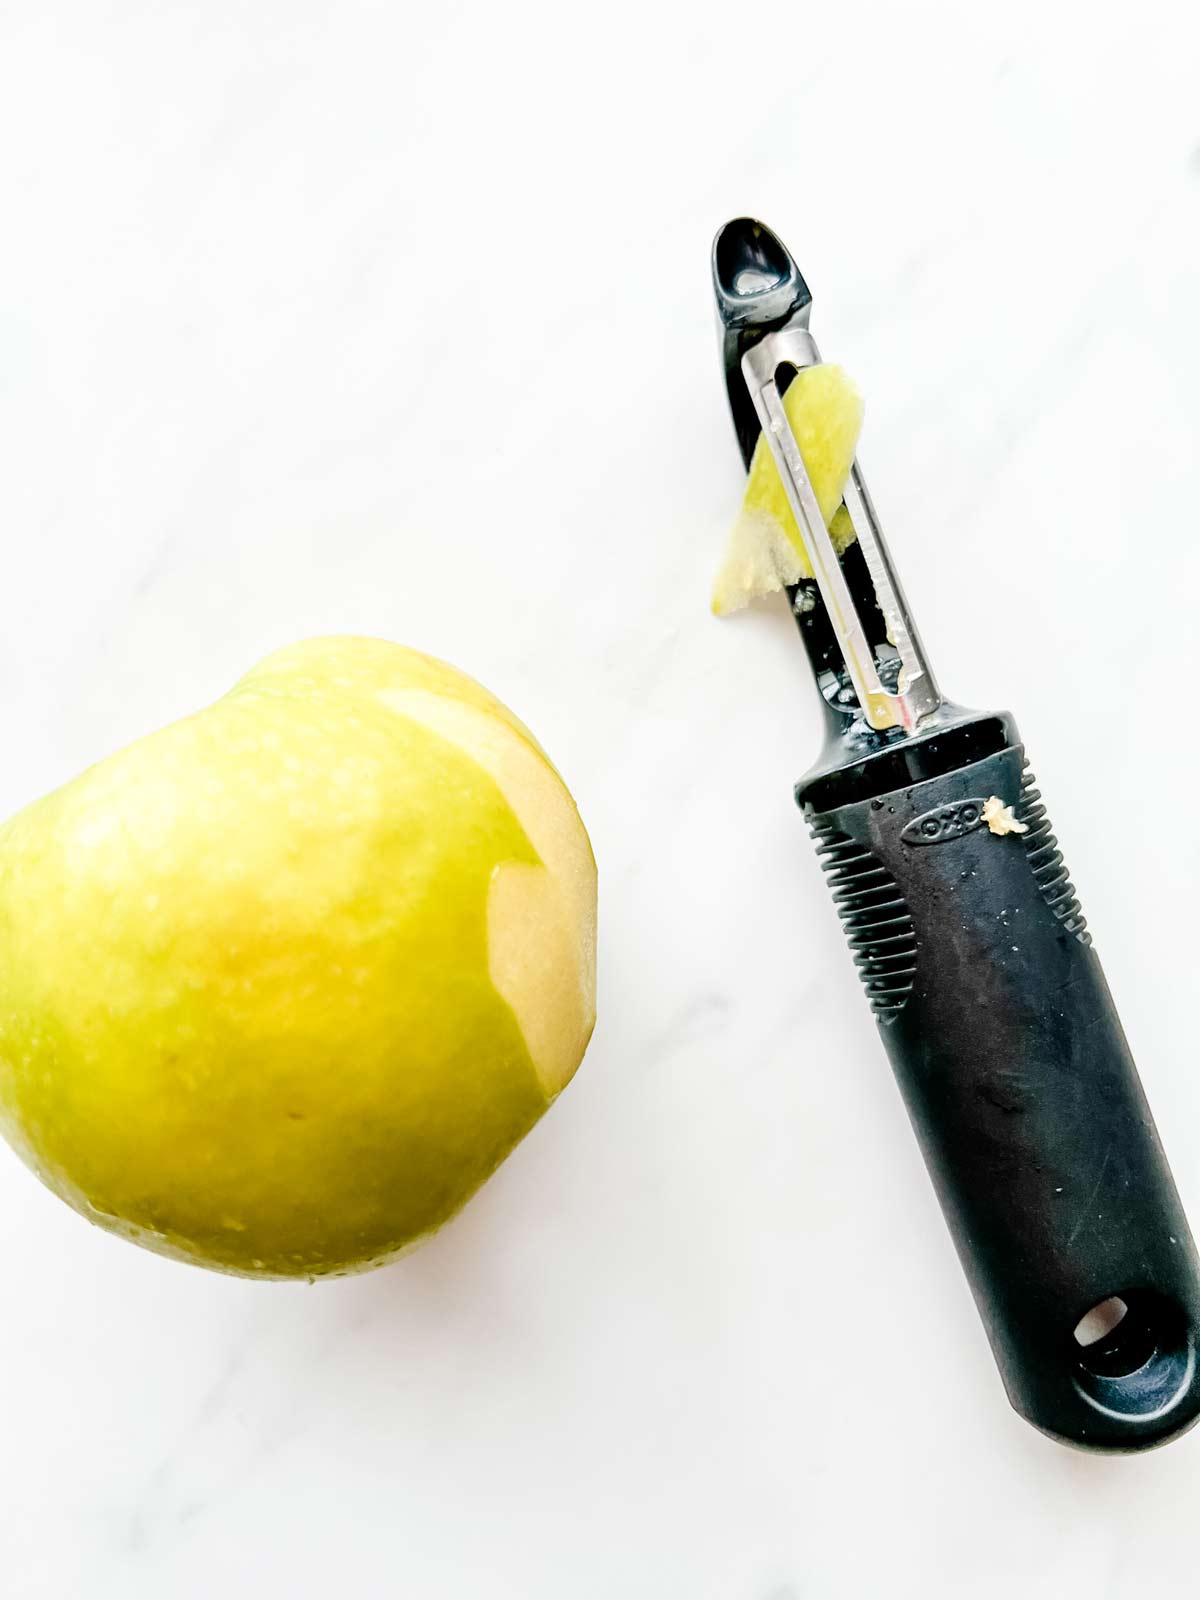 Photo of an apple with a peeler next to it.